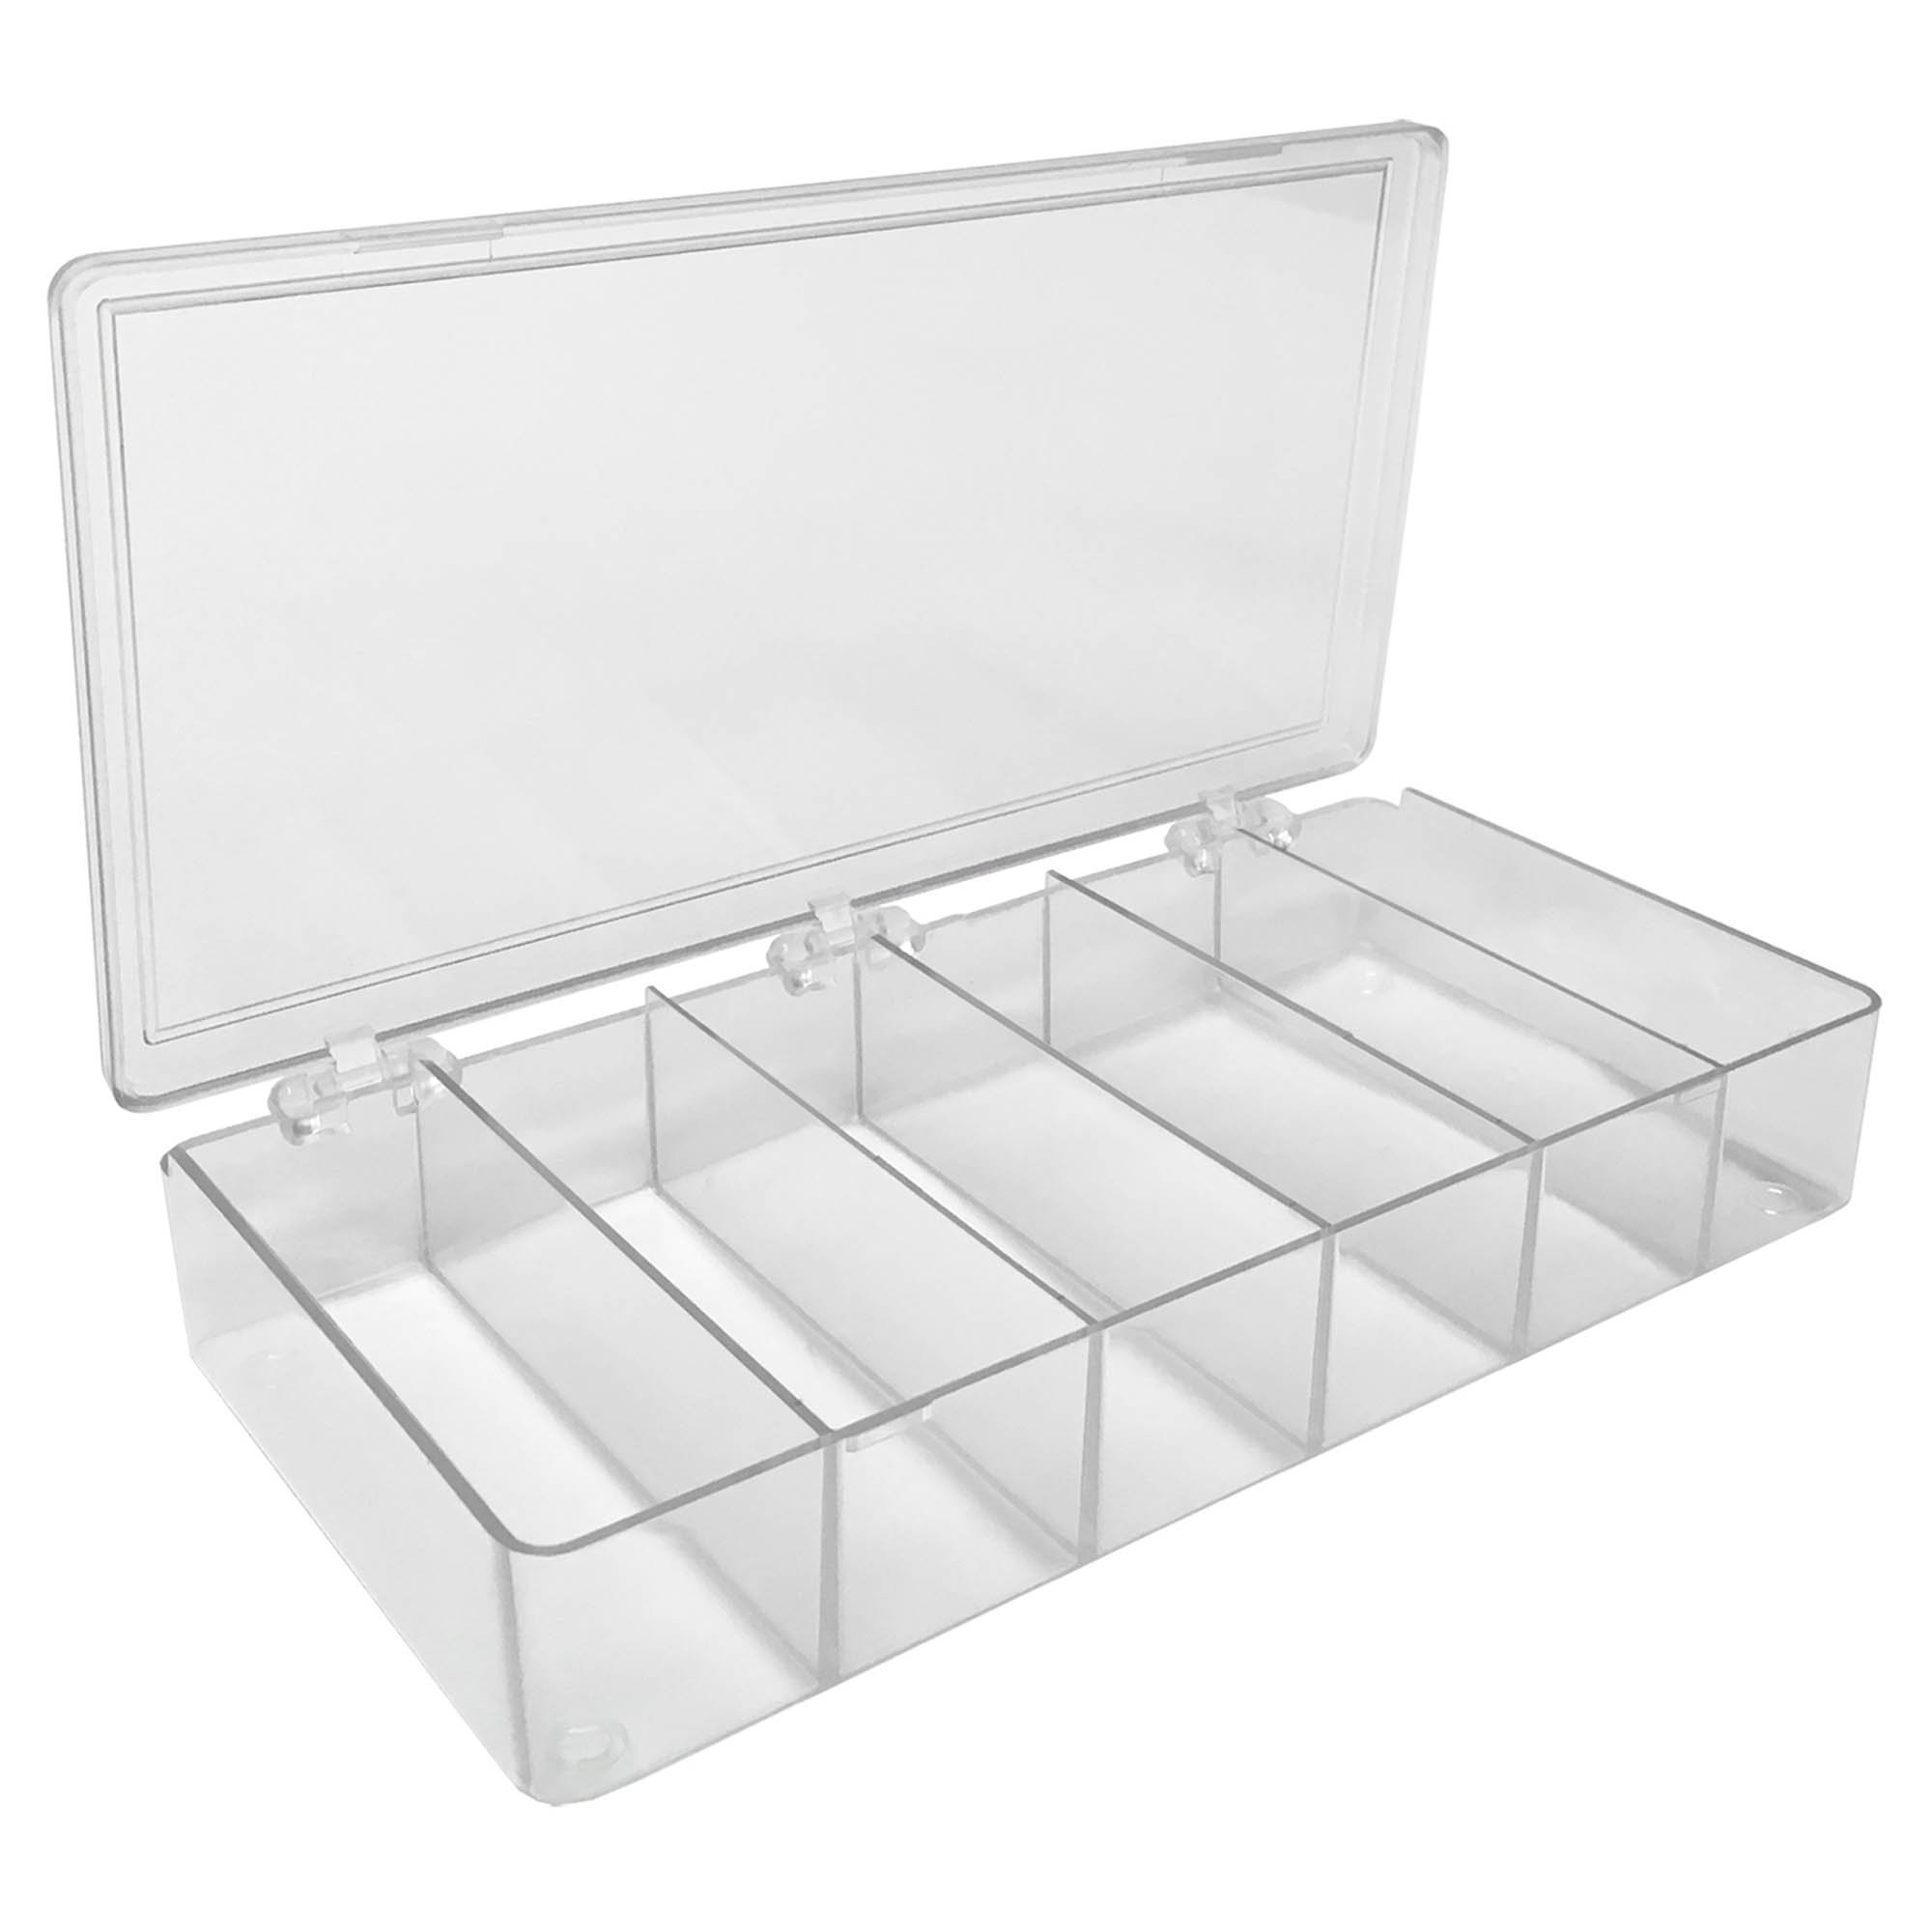 MultiBox Clear Western Blot Box - 6 Compartments 33 x 103 x 35mm Each (Case of 24)